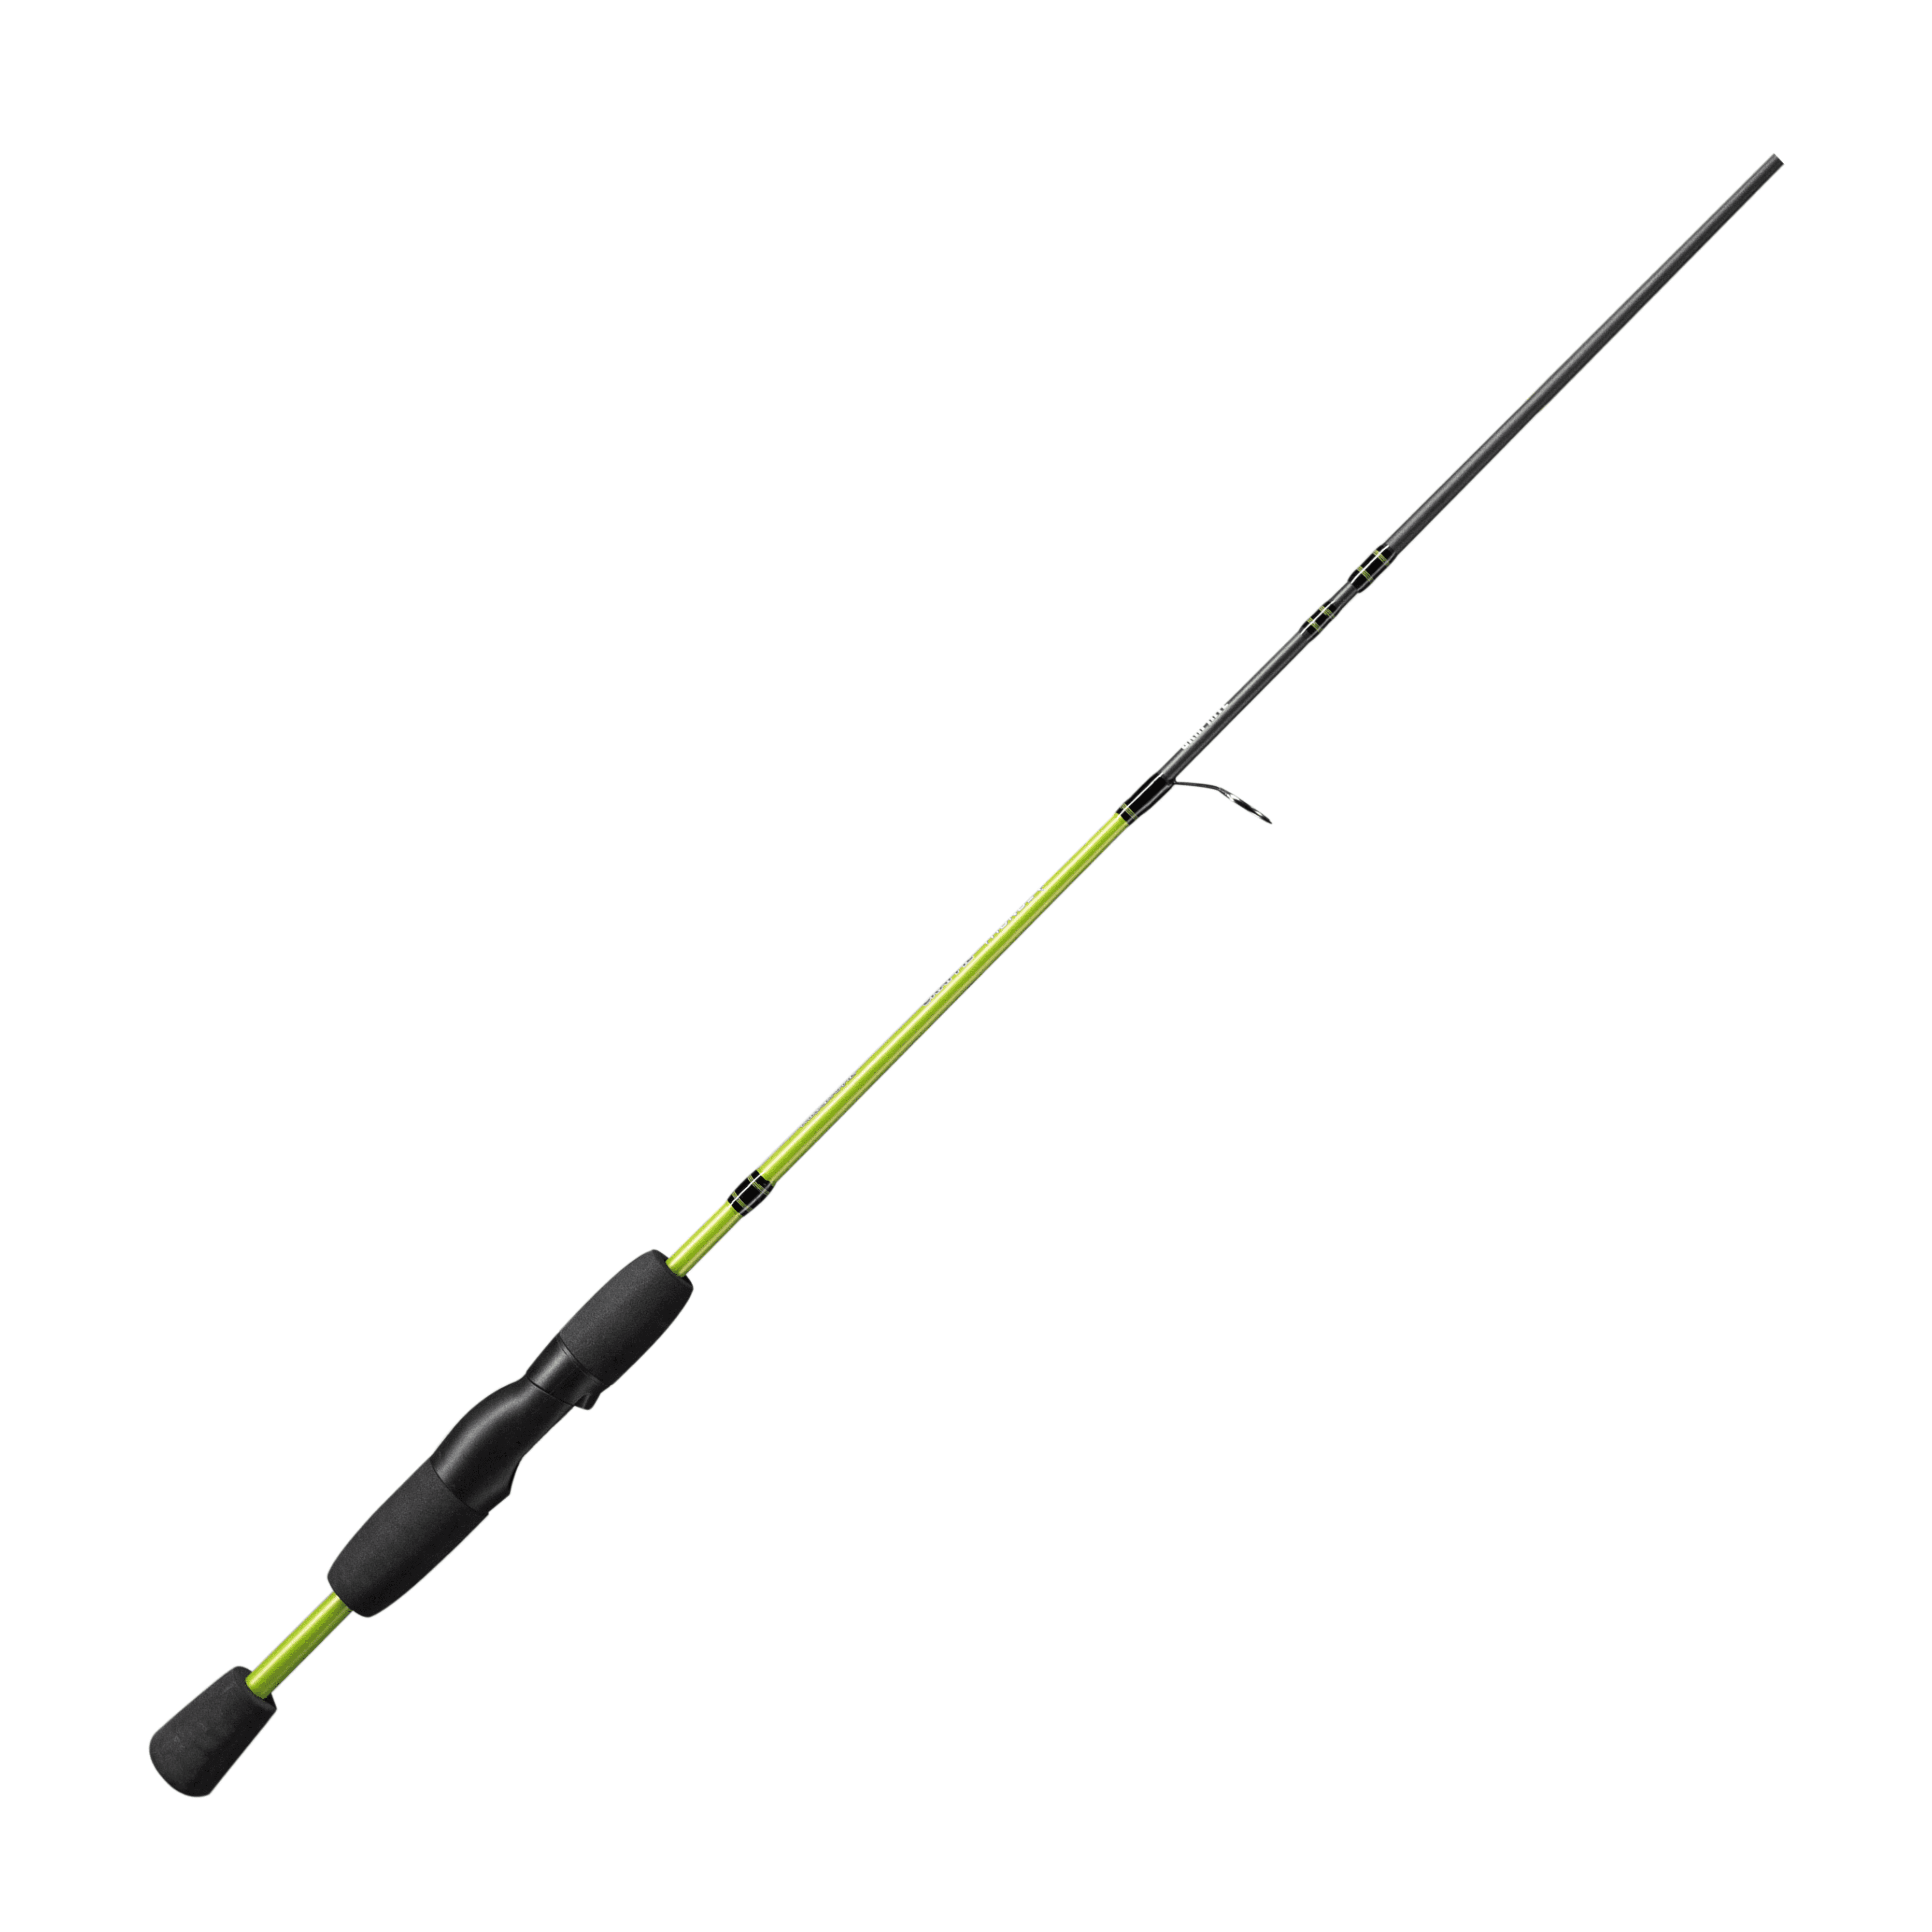 CRAPPIE THUNDER 5'6 SPINNING ROD 